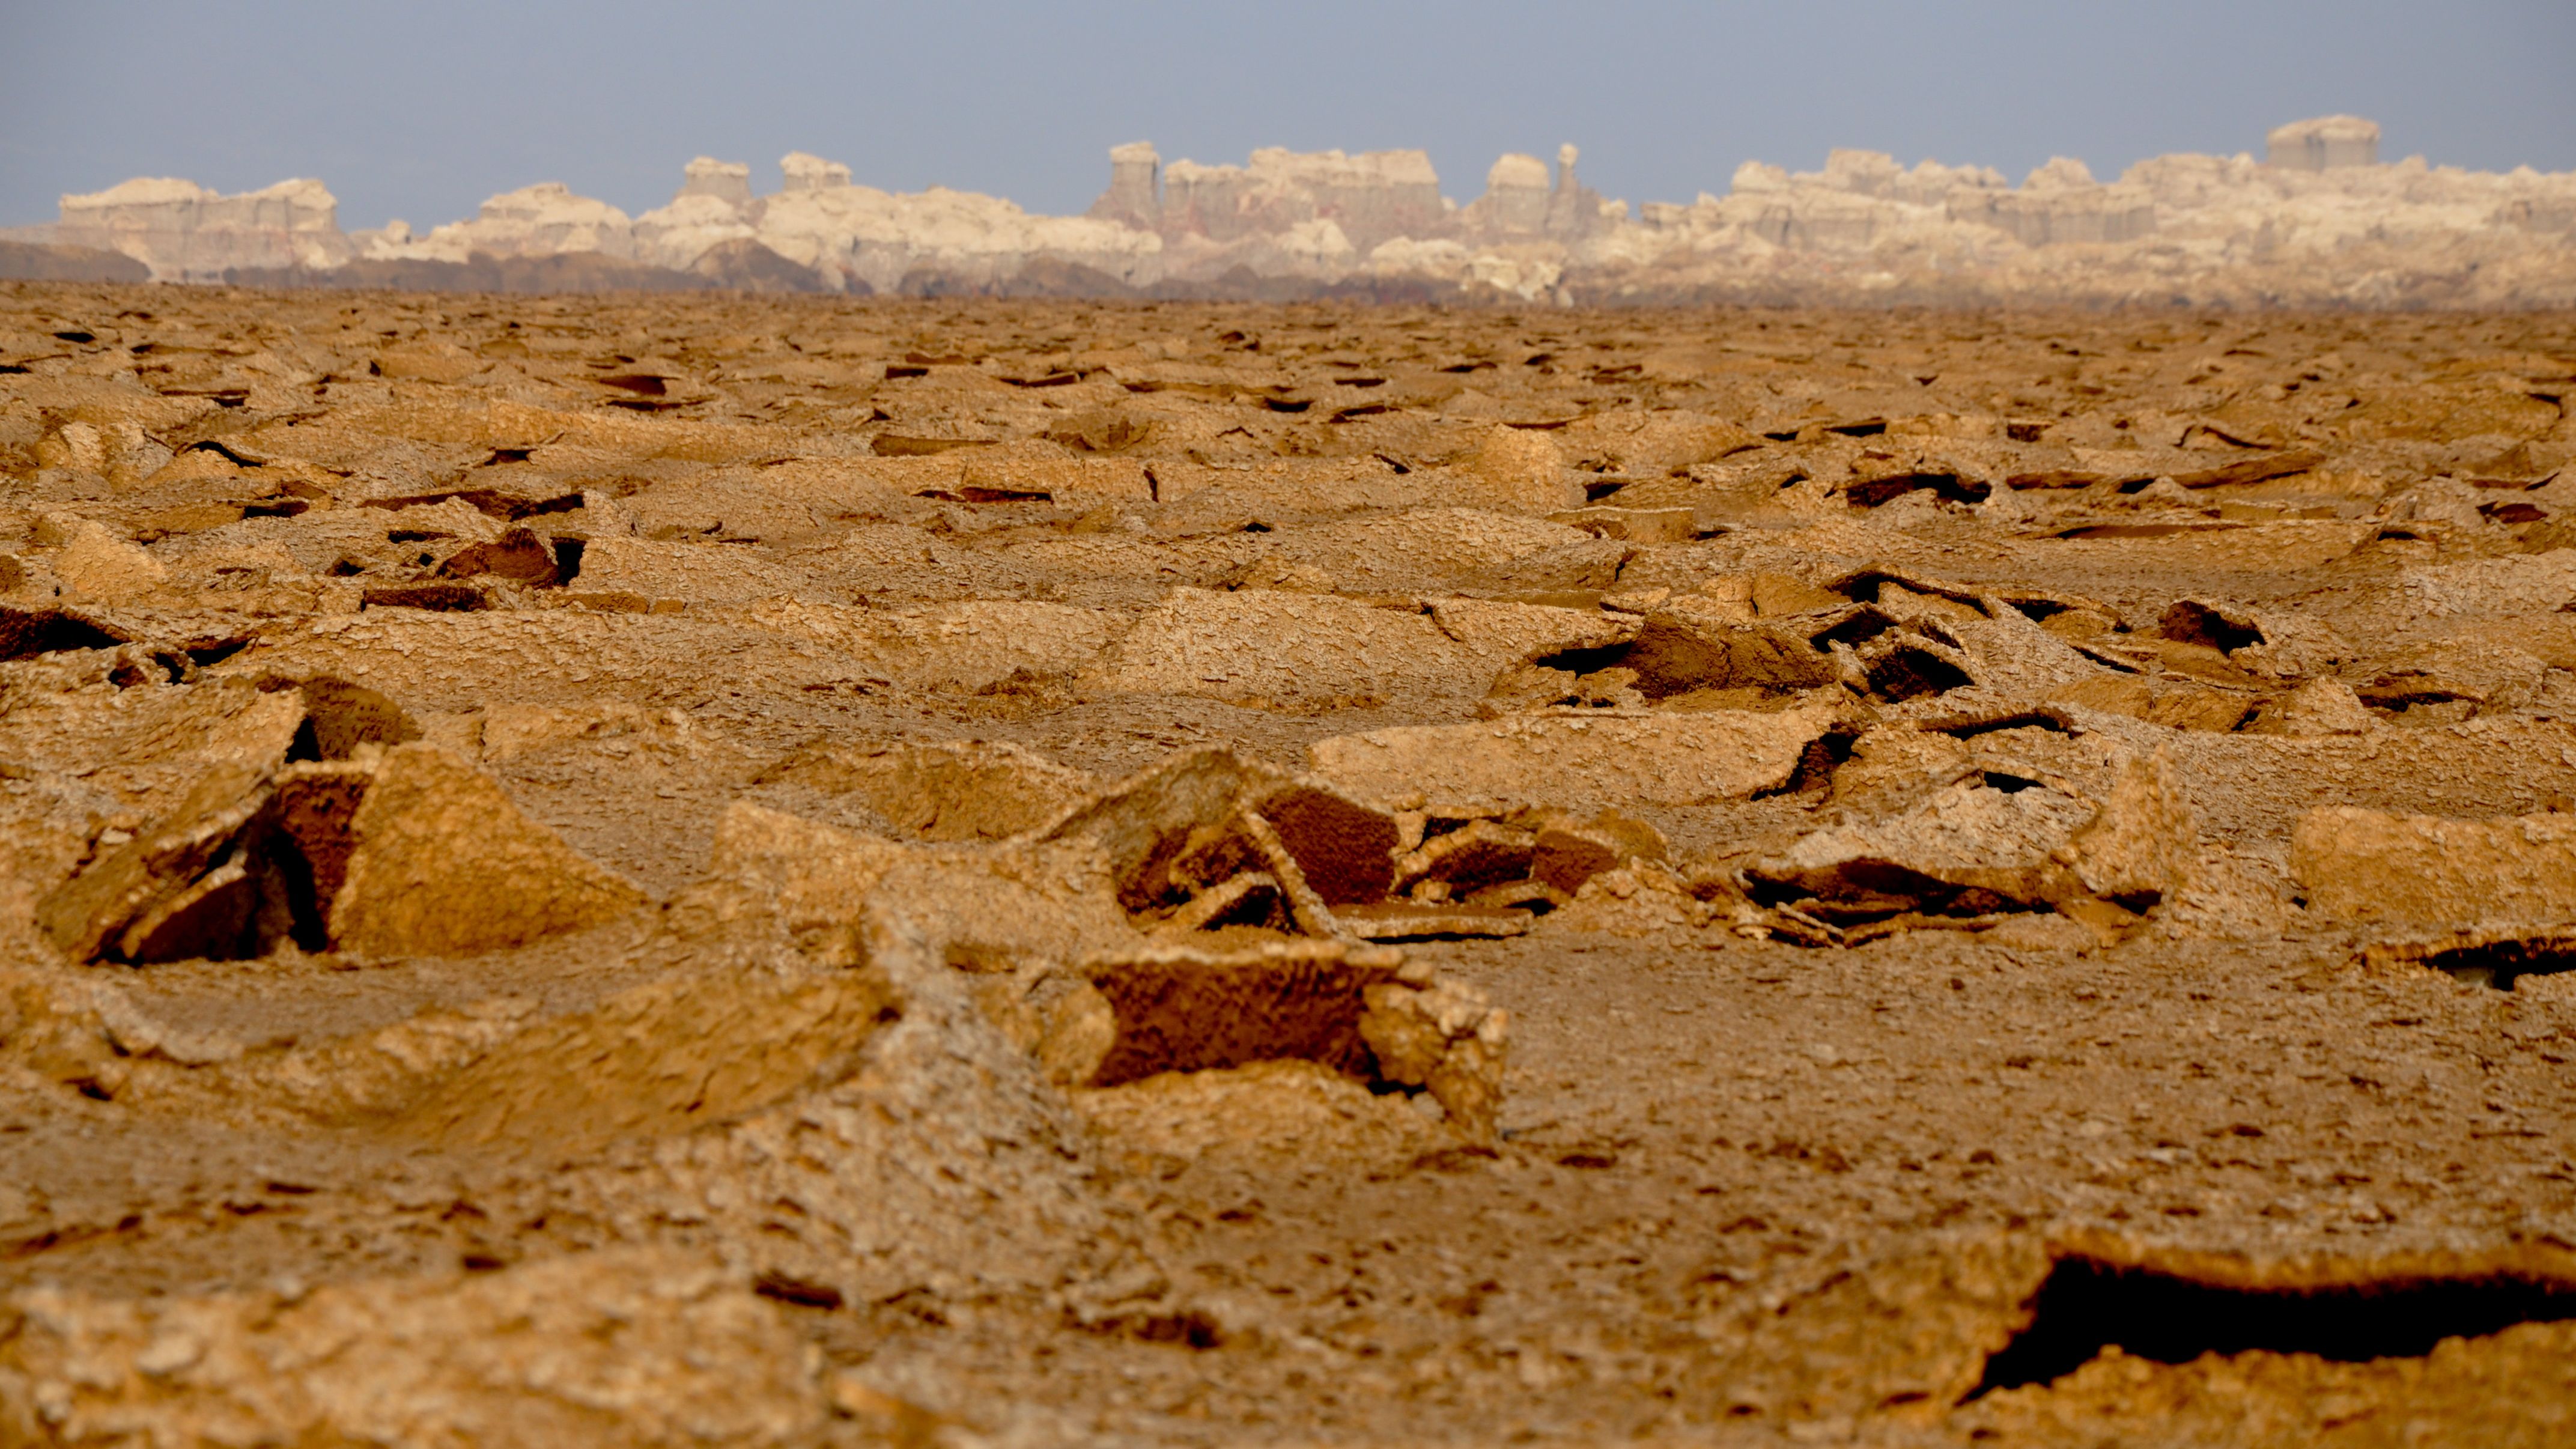 The volcanic landscape of the Danakil Depression is made up of basalt, acidic liquids and salt formations. 